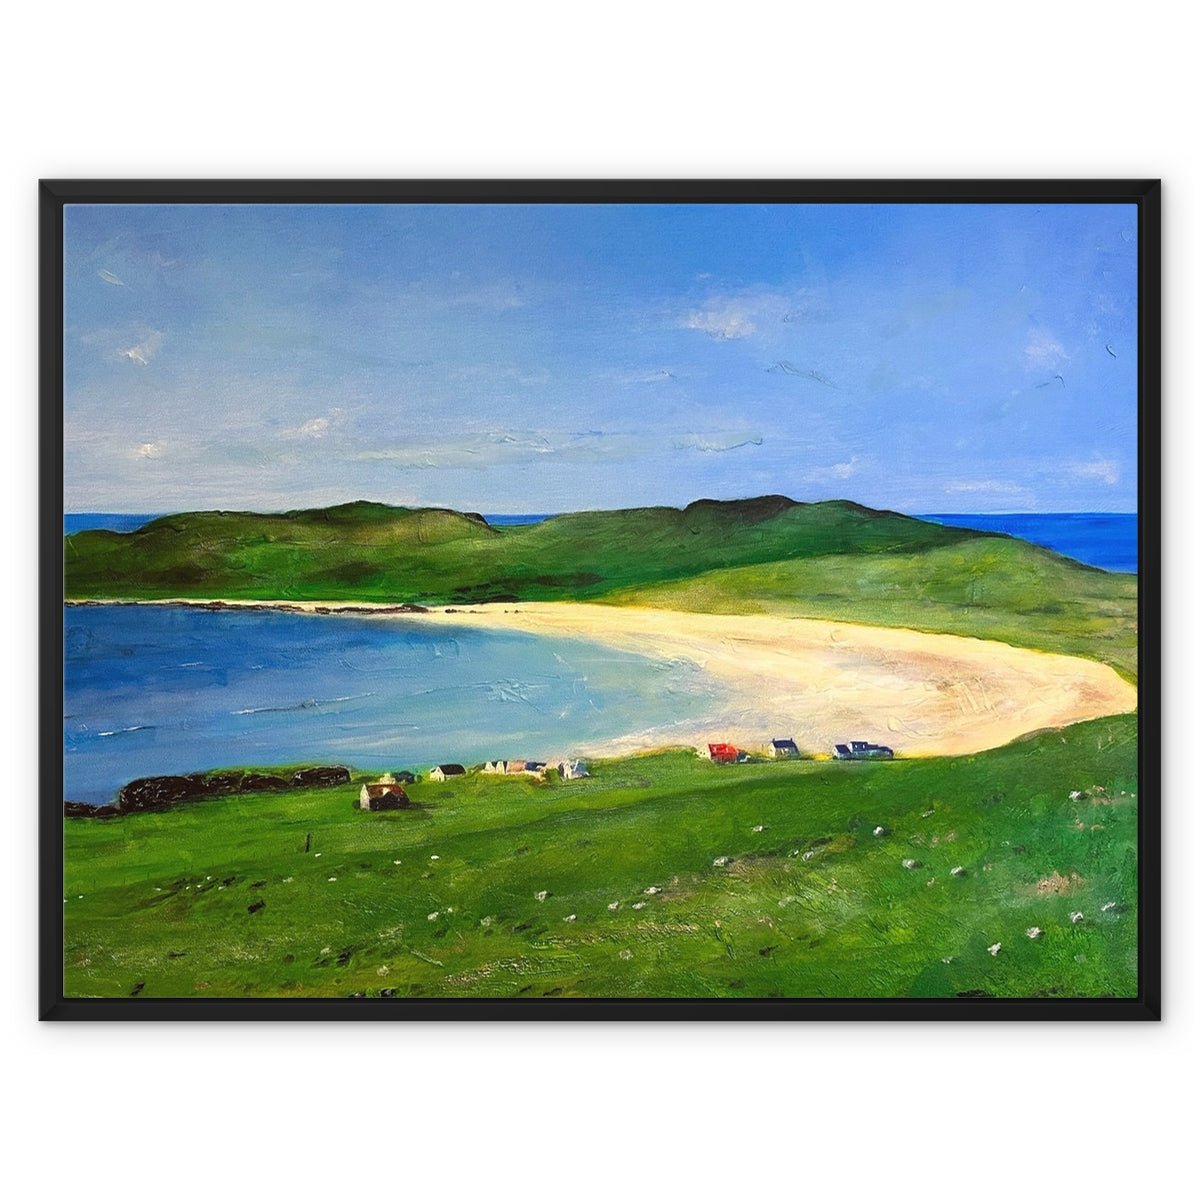 Balephuil Beach Tiree Painting | Framed Canvas-Floating Framed Canvas Prints-Hebridean Islands Art Gallery-32"x24"-Black Frame-Paintings, Prints, Homeware, Art Gifts From Scotland By Scottish Artist Kevin Hunter